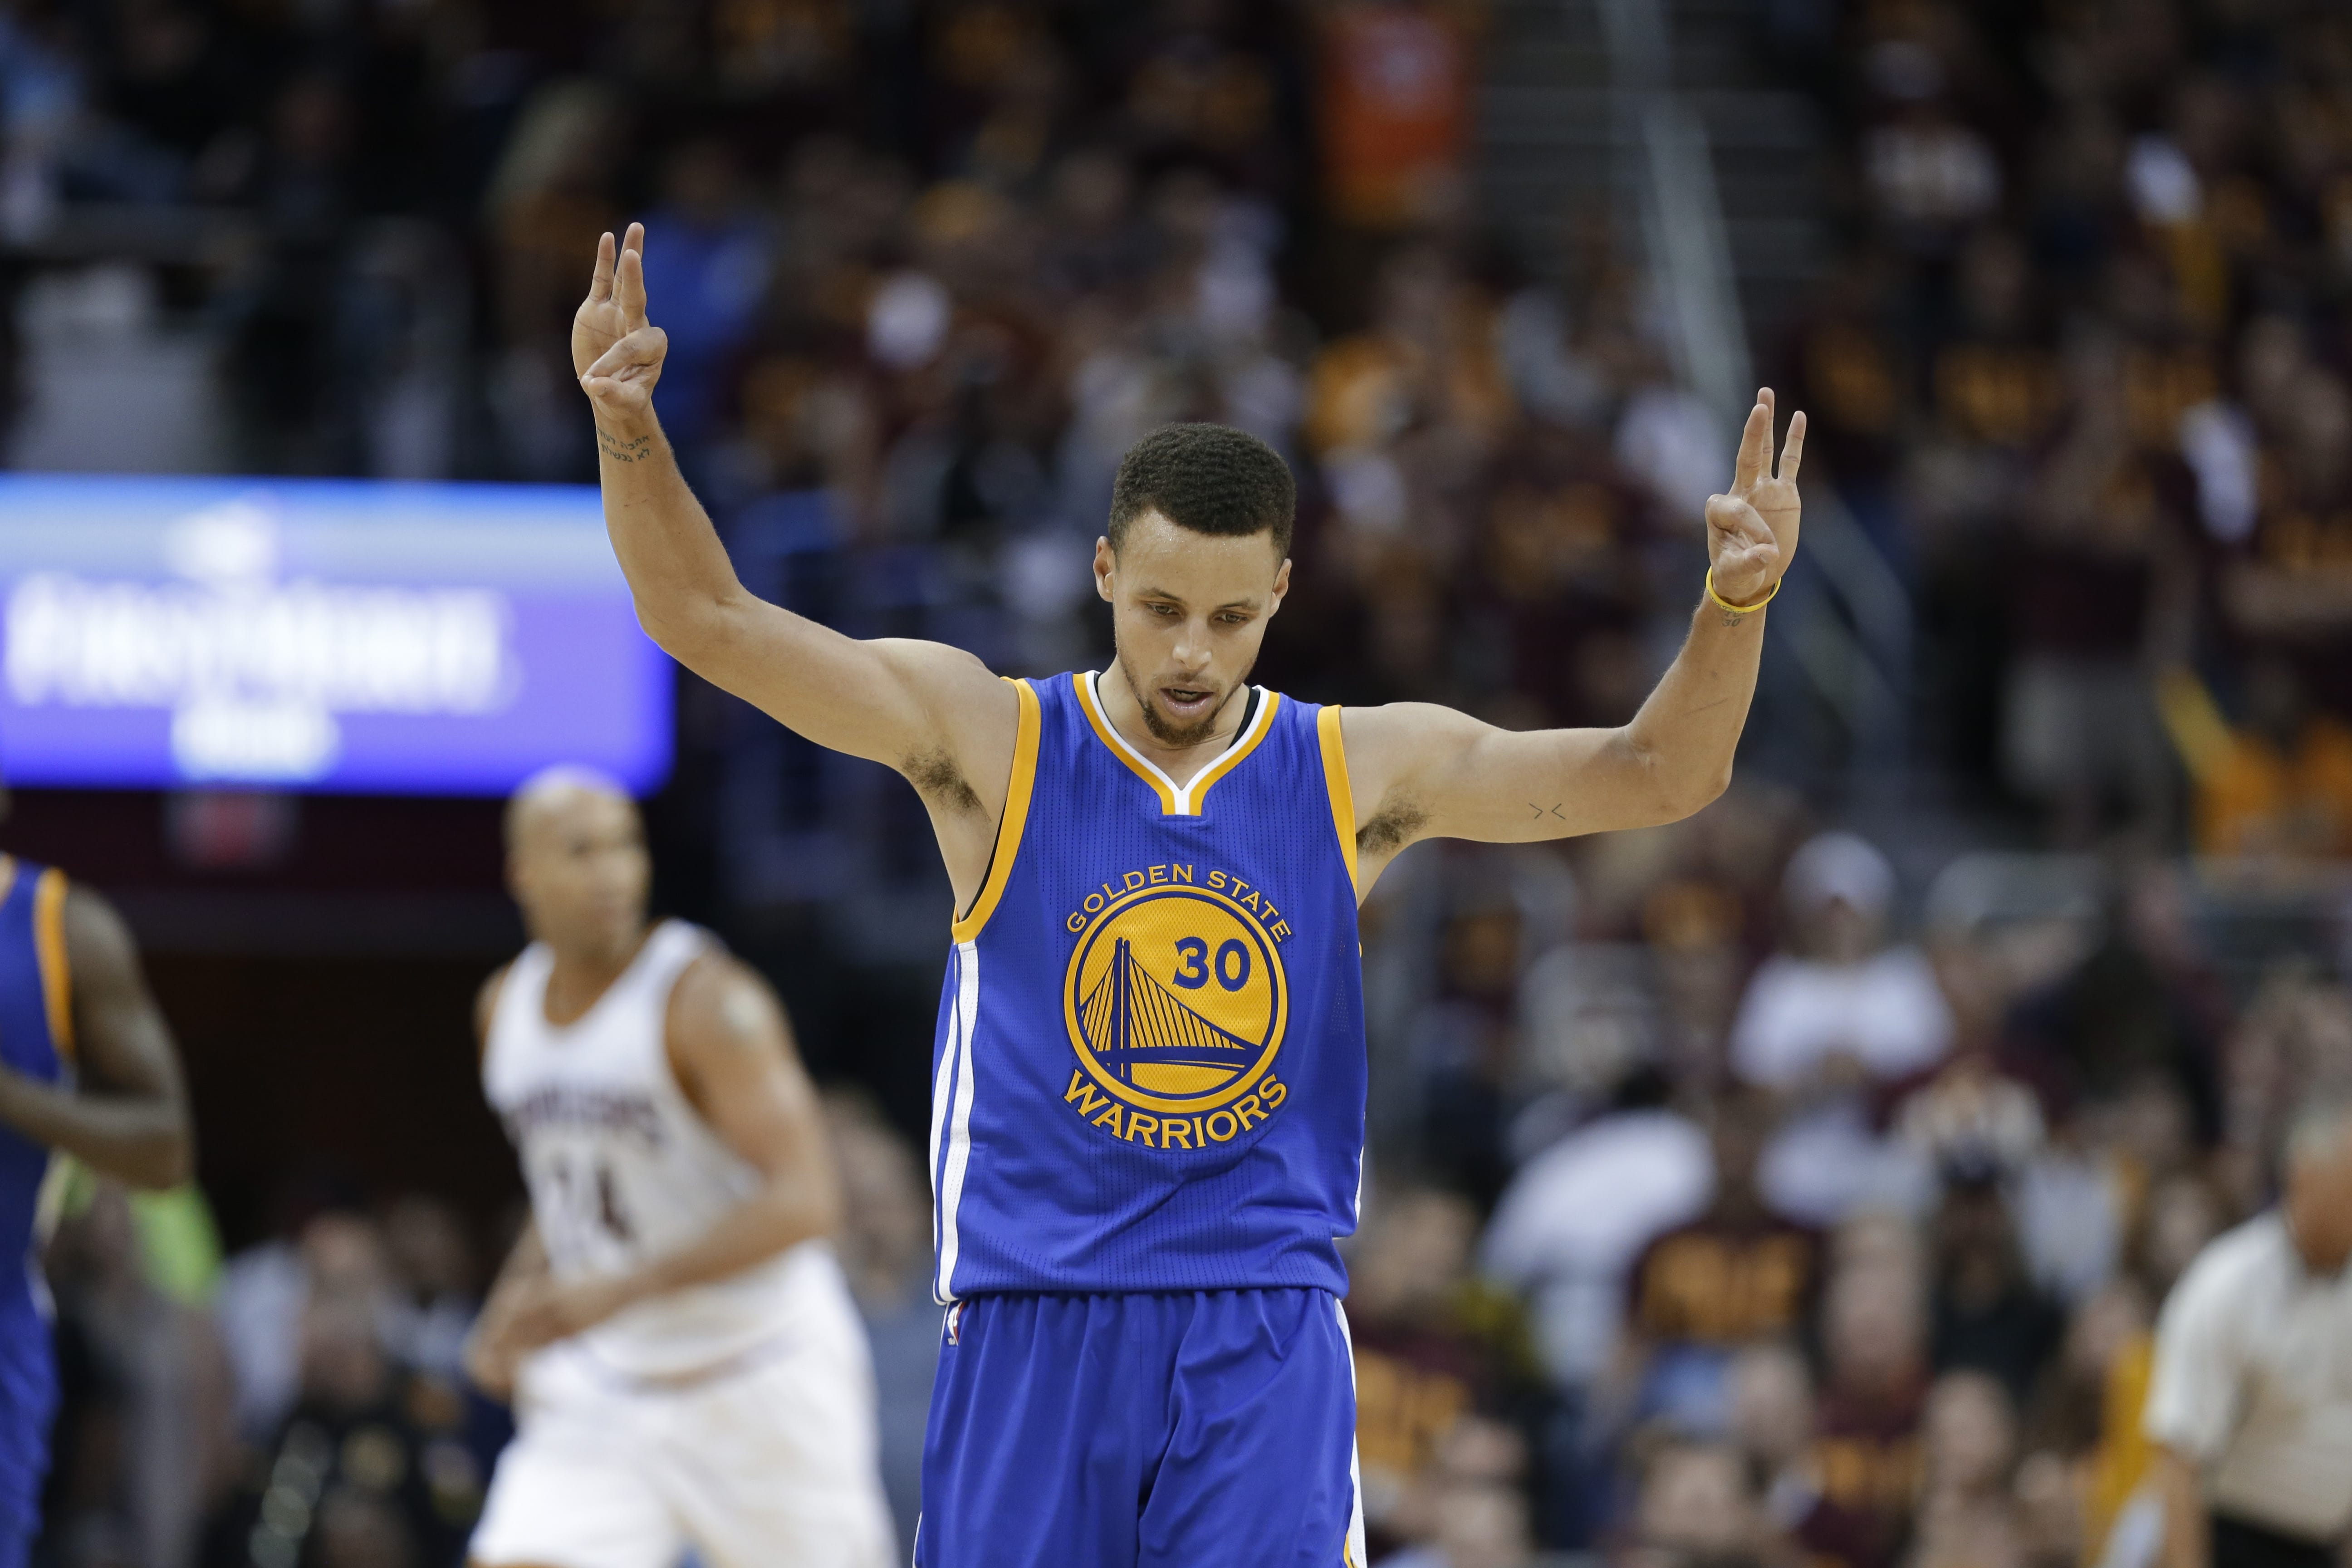 Golden State Warriors guard Stephen Curry (30) celebrates a basket against the Cleveland Cavaliers during the second half of Game 4 of basketball's NBA Finals in Cleveland, Friday, June 10, 2016.